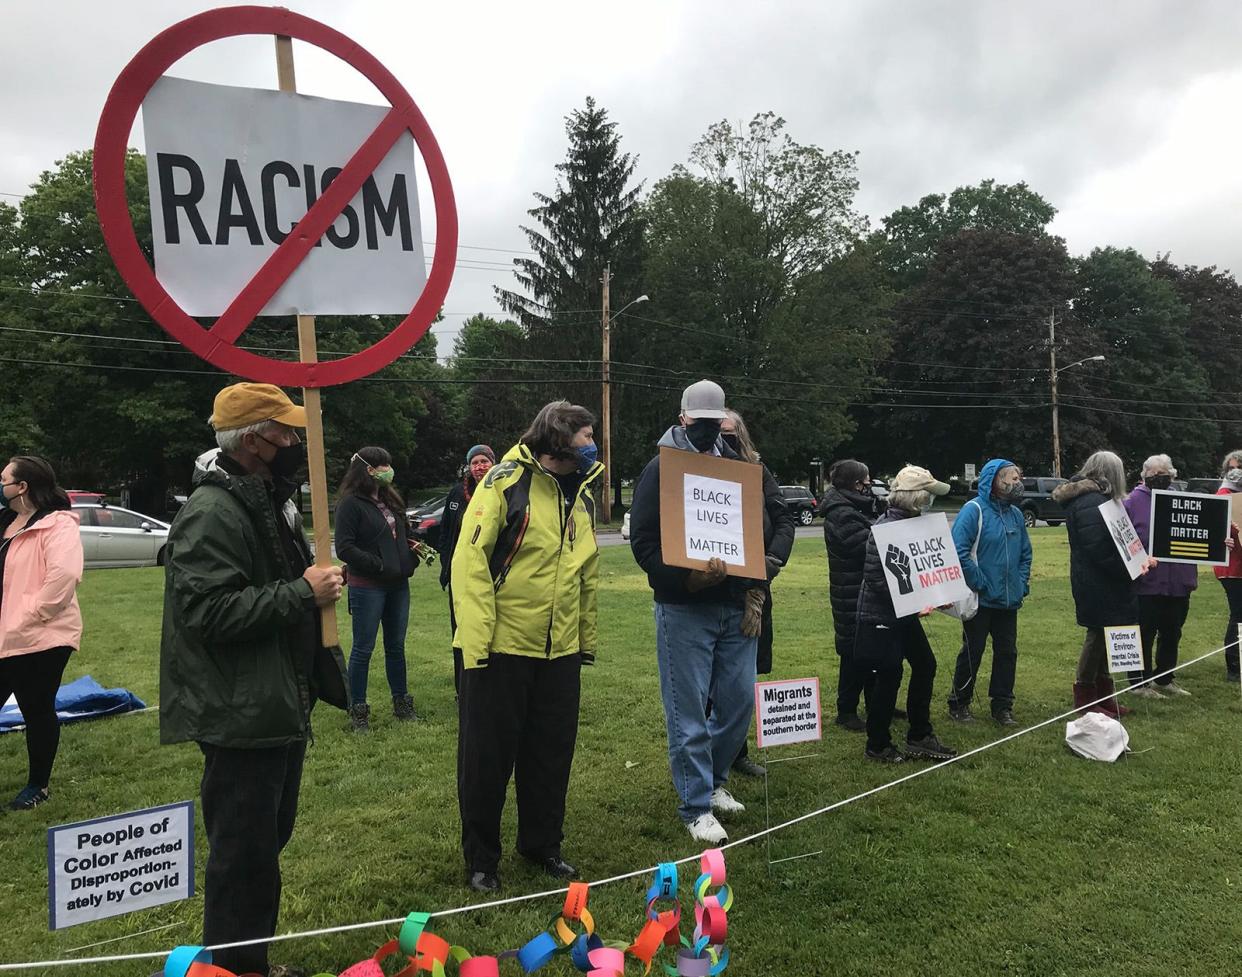 The Hamilton Area Anti-Racism Coalation pronounced their support of all people regardless of color May 29 during their Memorial Anti-Racism Rally on the South Green in Hamilton.